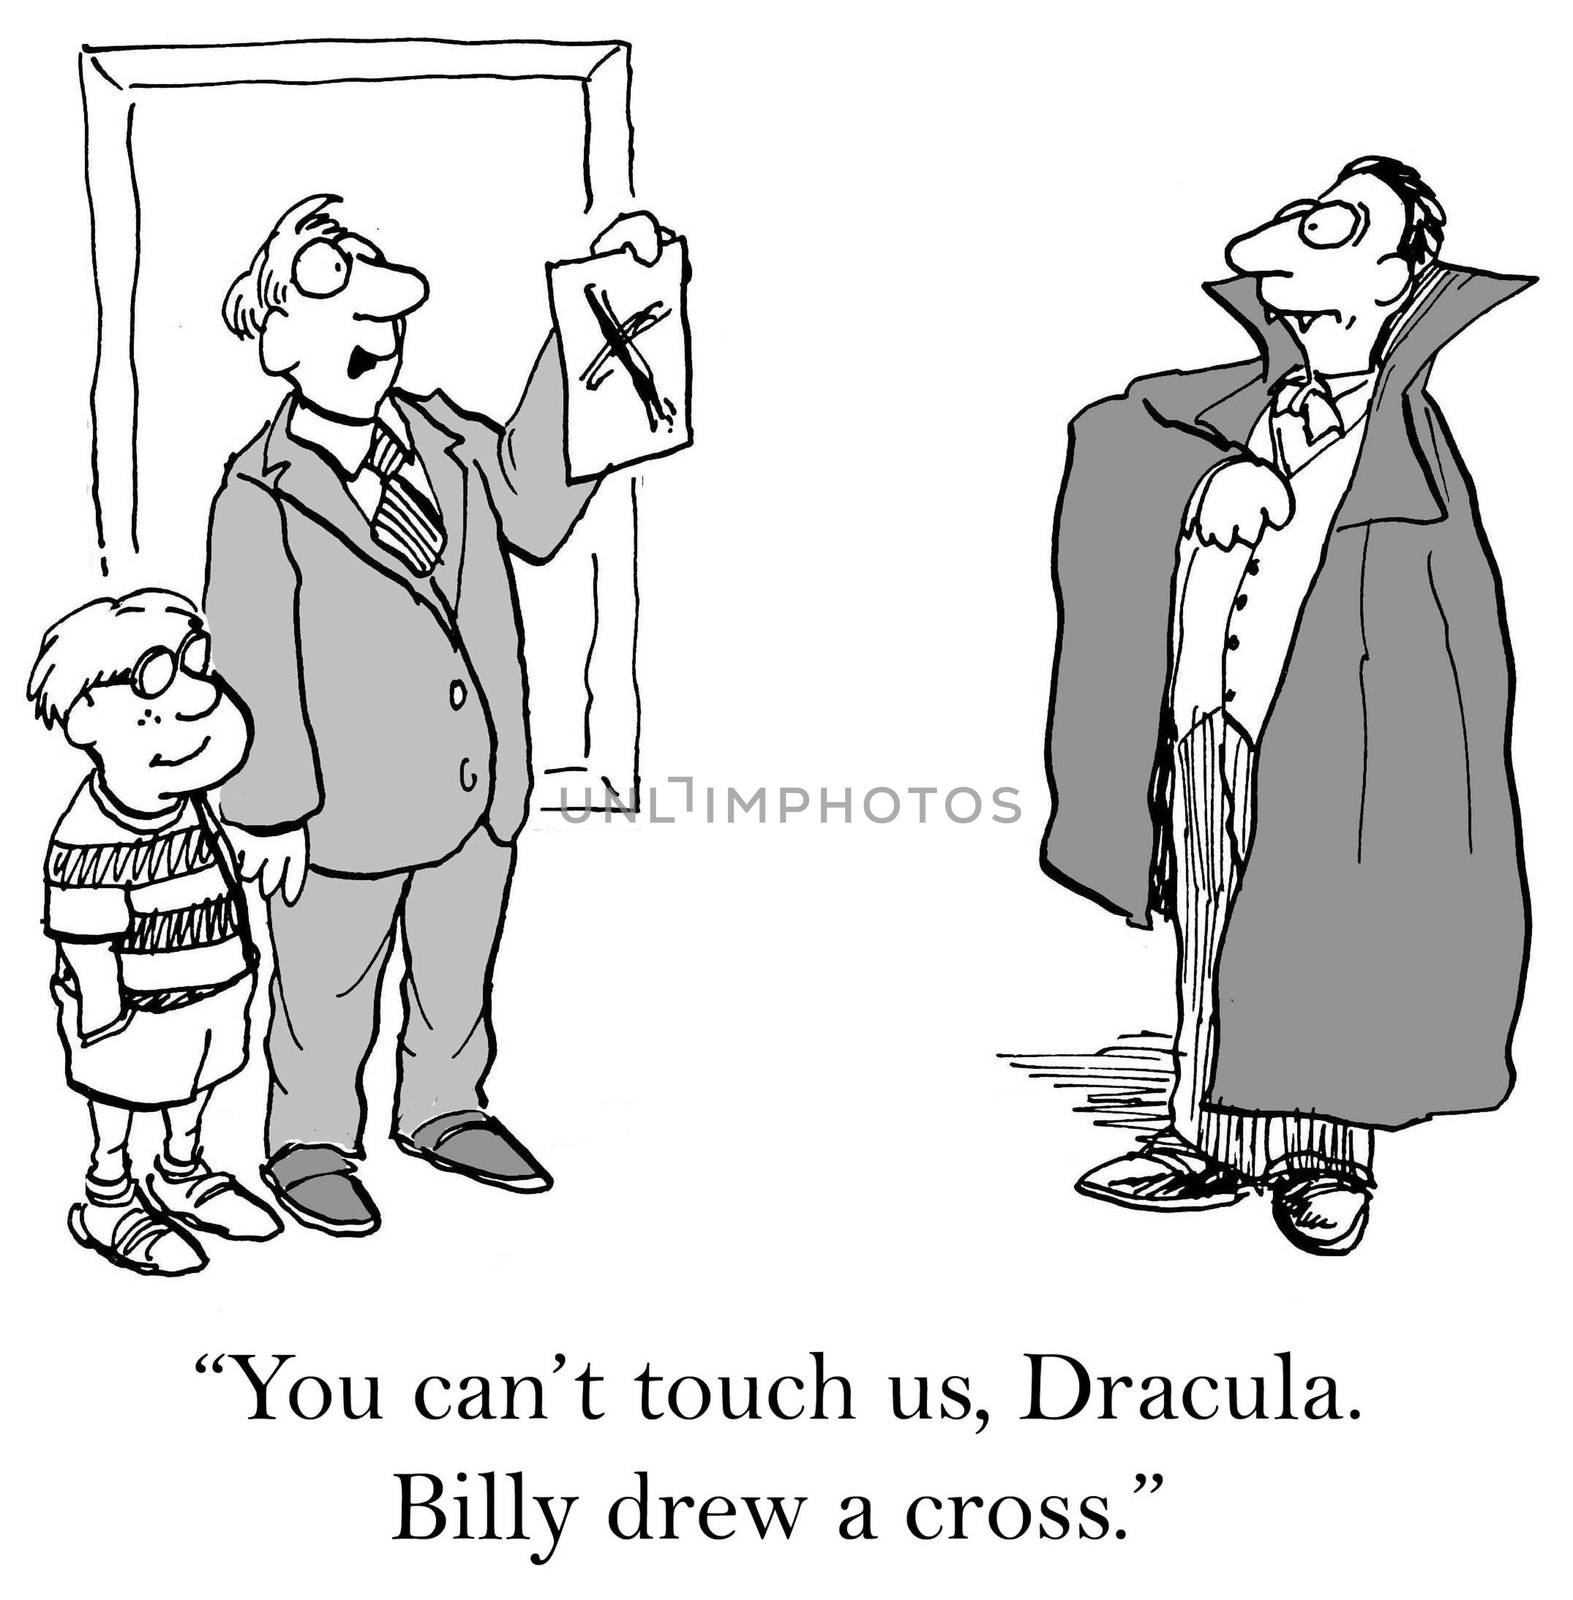 "You can't touch us, Dracula. Billy drew a cross."